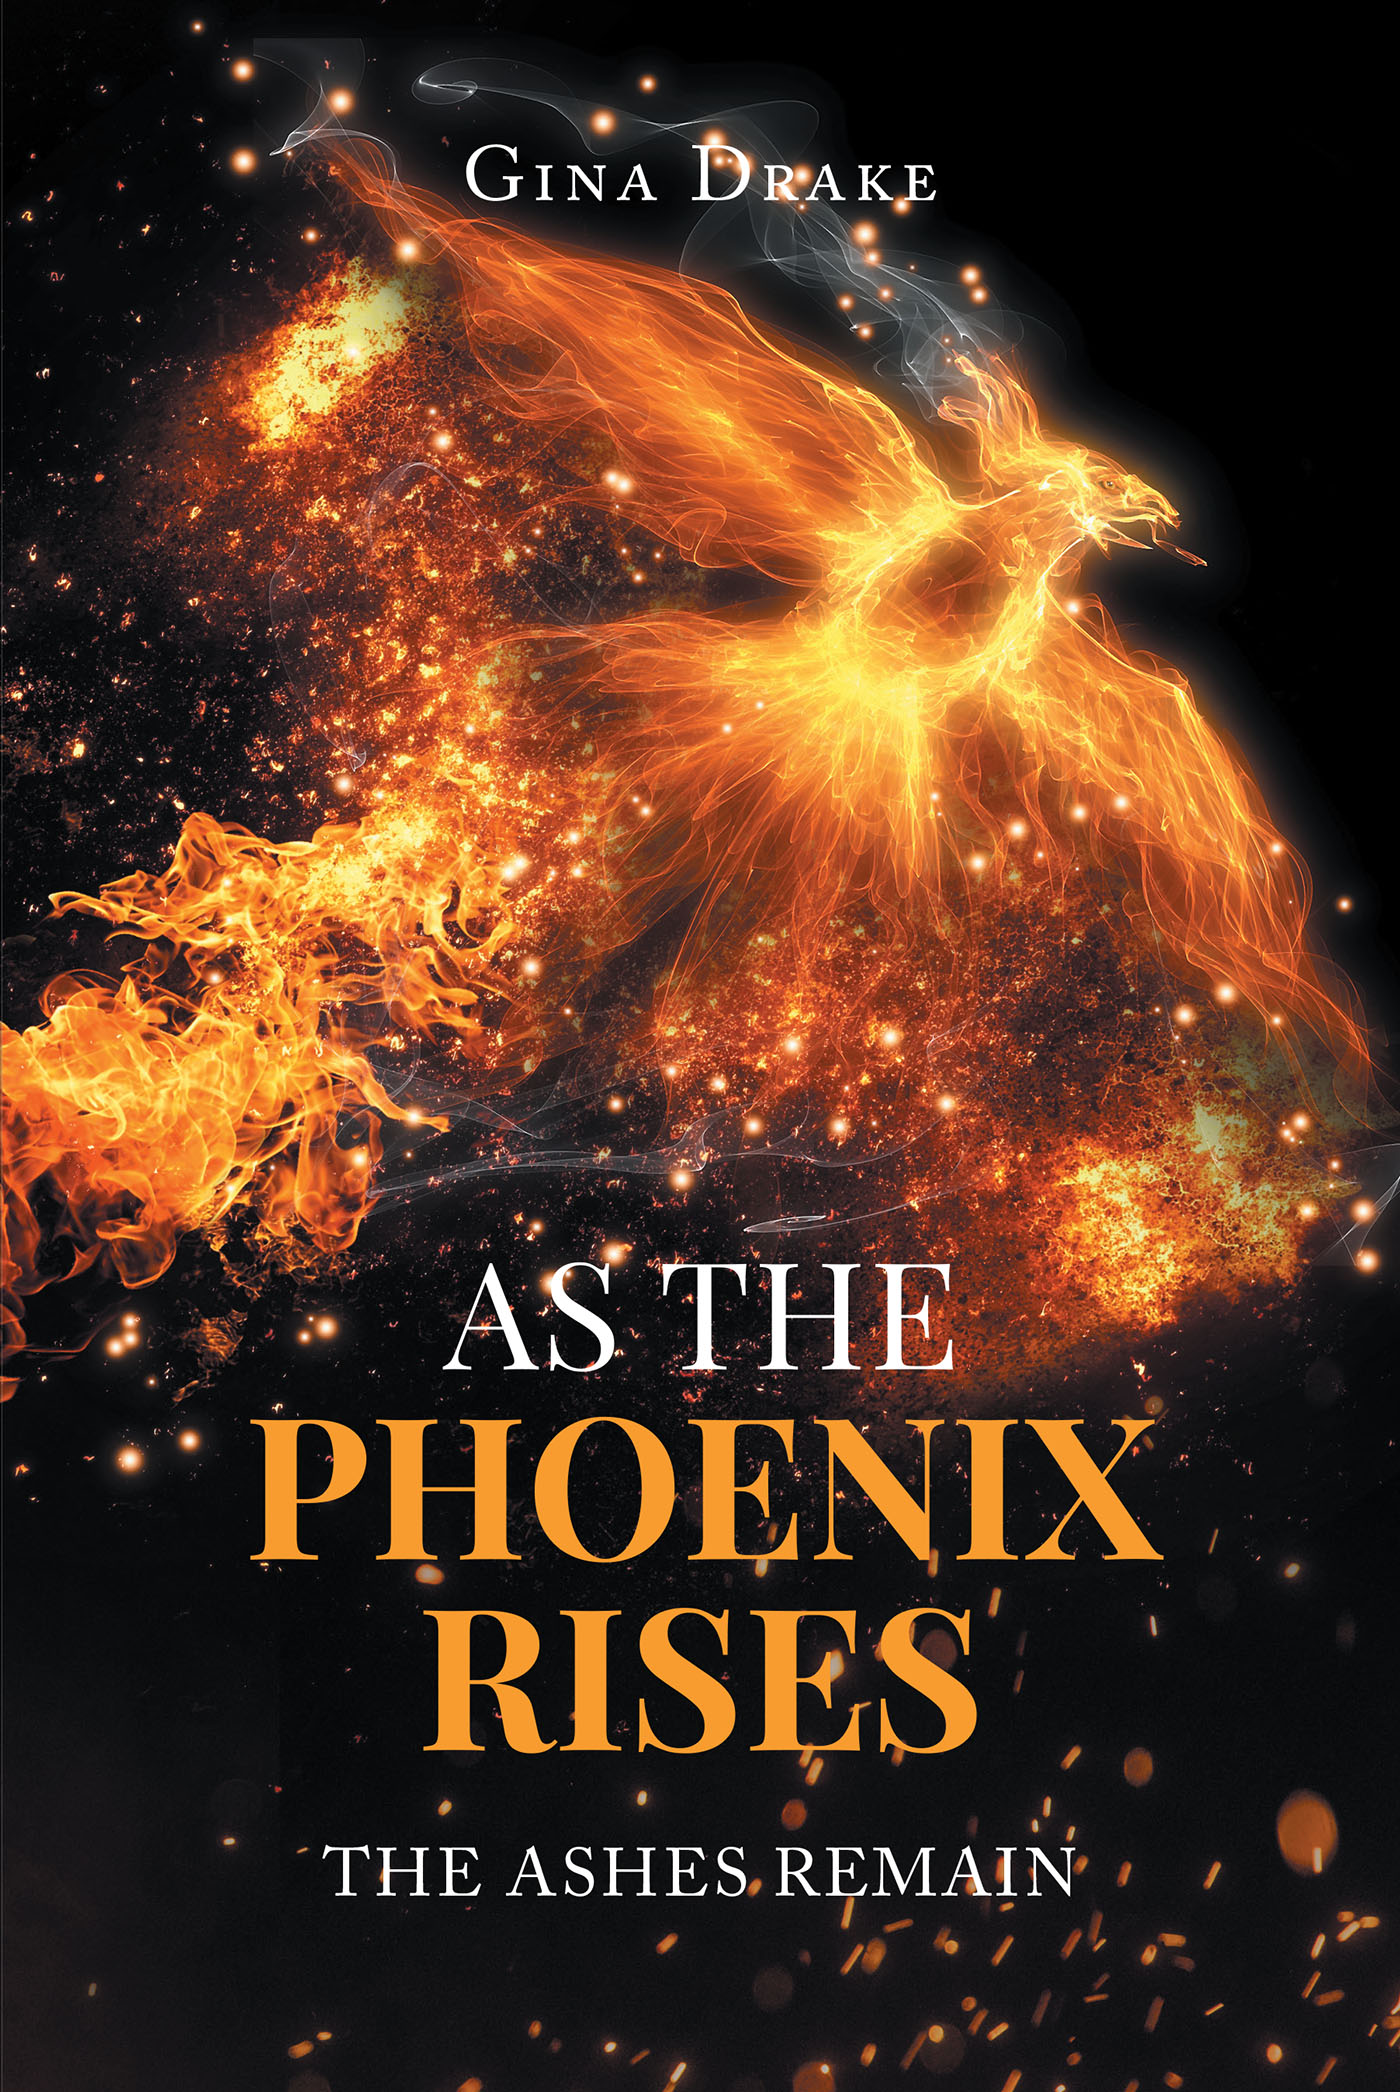 Gina Drake’s New Book, "as the Phoenix Rises: the Ashes Remain," is an Intensive and Bold Dive Into the Effects and Outcome of Childhood Sexual Abuse